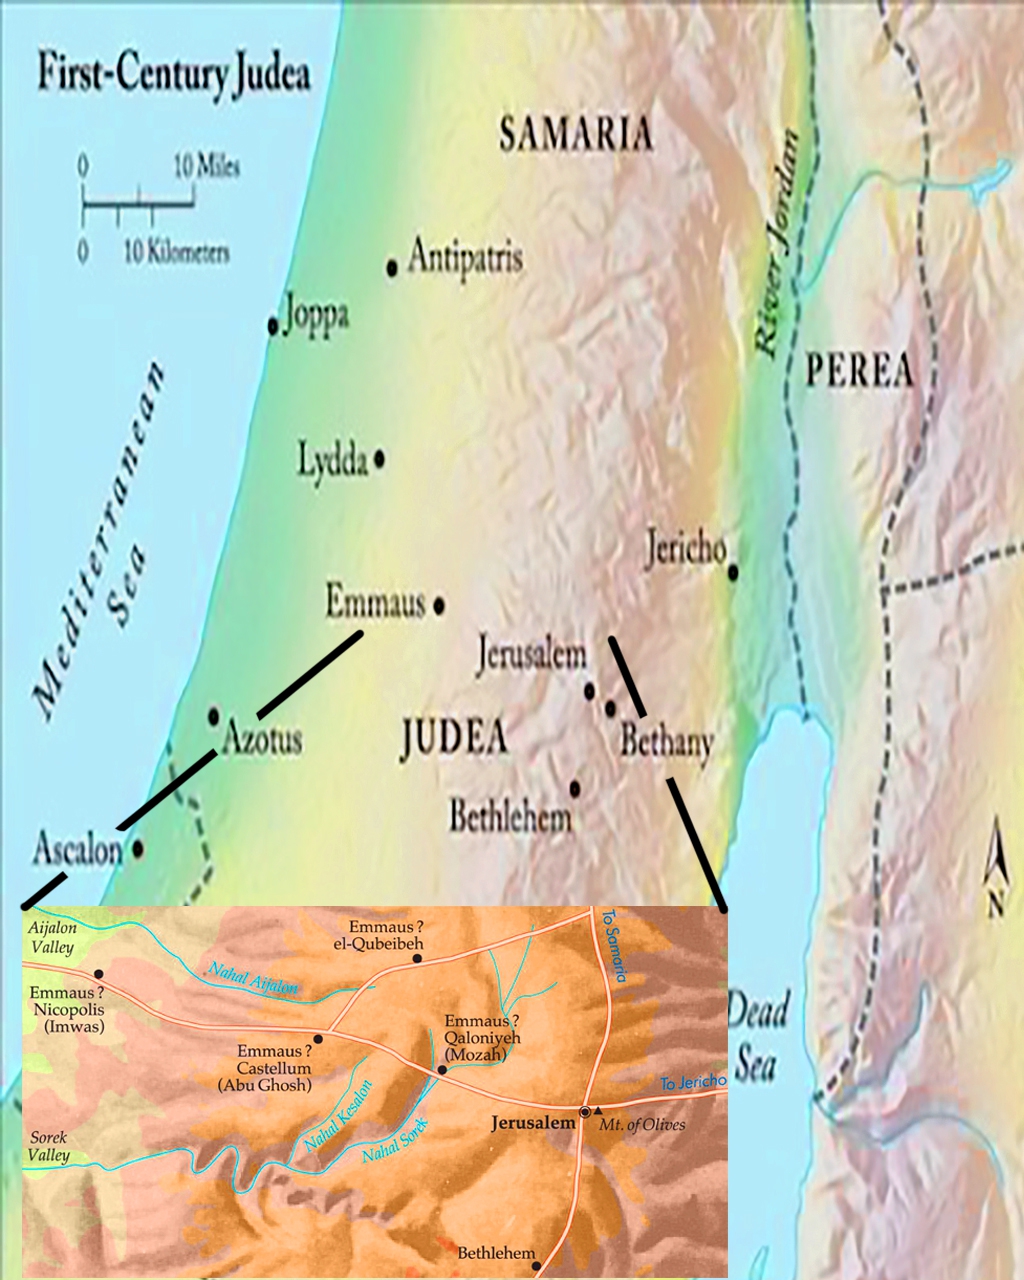 Map of 1st century Judea showing Jerusalem and Emmaus along with others, and an inset map of villages with a name including "Emmaus".